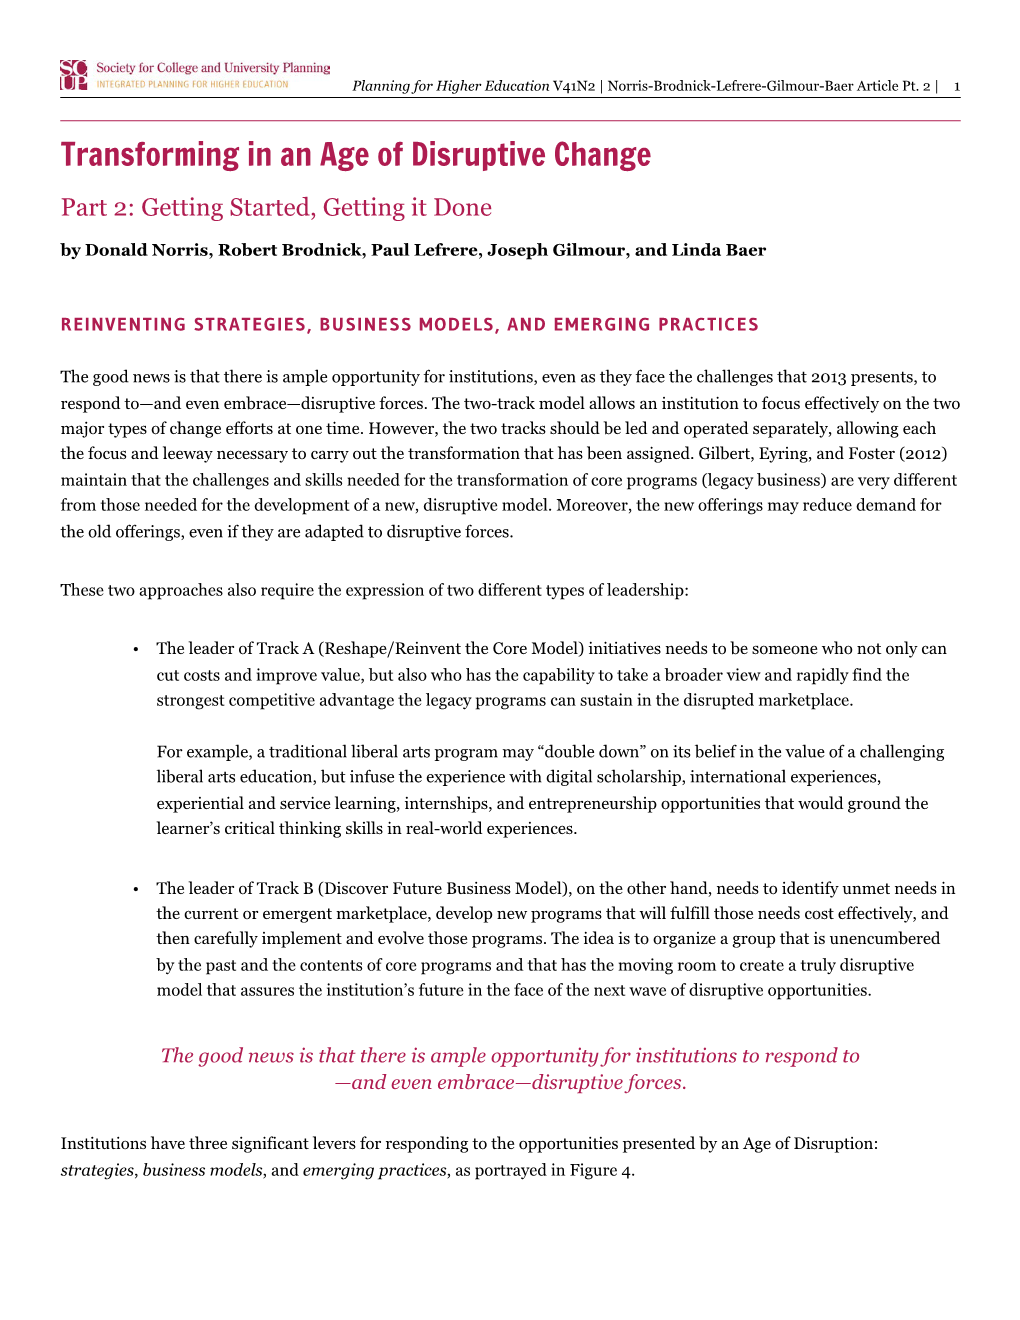 Transforming in an Age of Disruptive Change Part 2: Getting Started, Getting It Done by Donald Norris, Robert Brodnick, Paul Lefrere, Joseph Gilmour, and Linda Baer